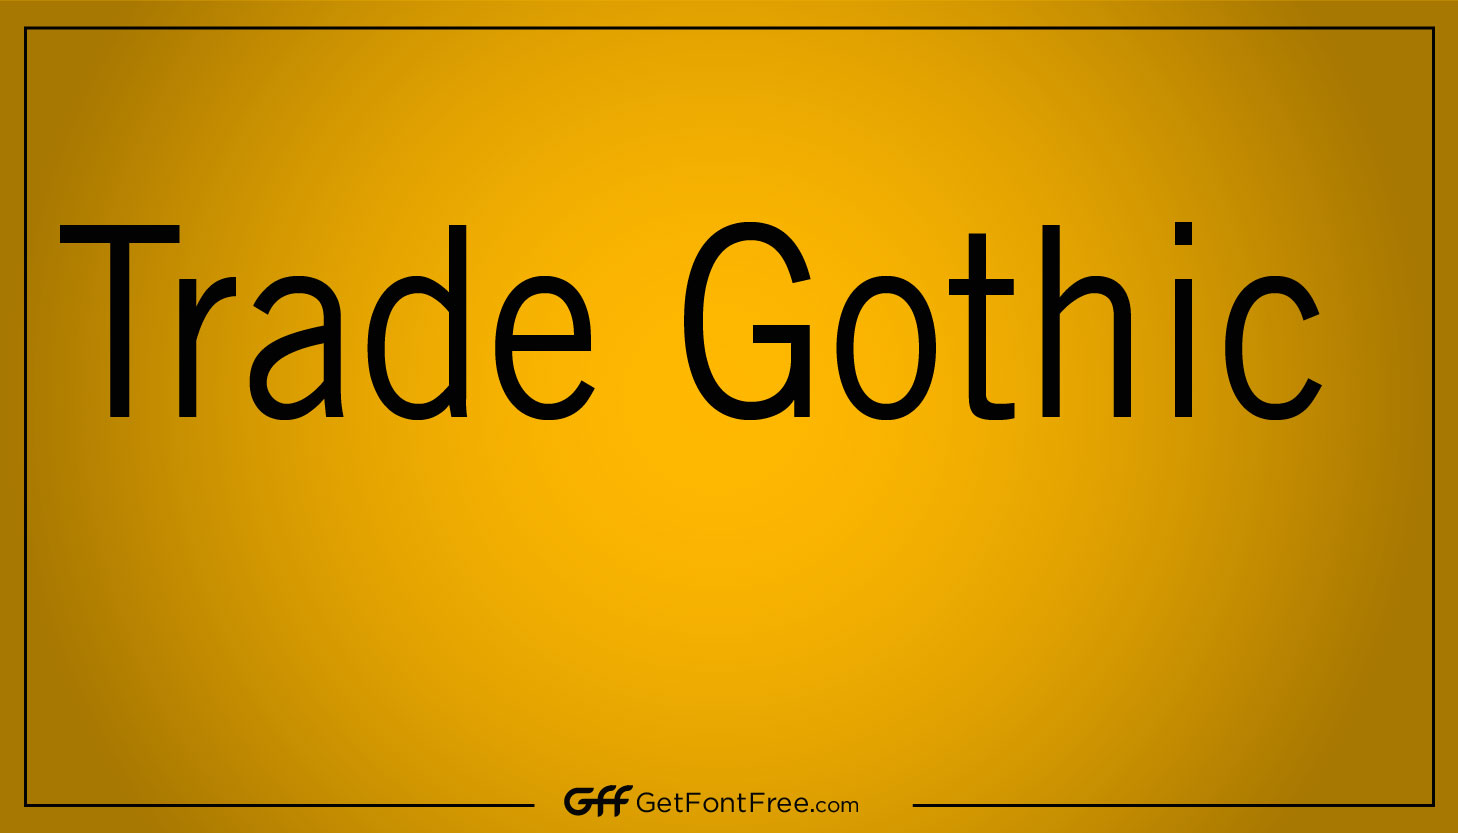 Trade Gothic Font is a sans-serif typeface that was designed in 1948 by Jackson Burke, a renowned American typeface designer. The font was originally created for Linotype-Hell Company, a type foundry based in Germany, and has since become a popular choice for designers in various fields. Trade Gothic is known for its clean and modern aesthetic, making it a versatile font that can be used in a wide range of design applications.